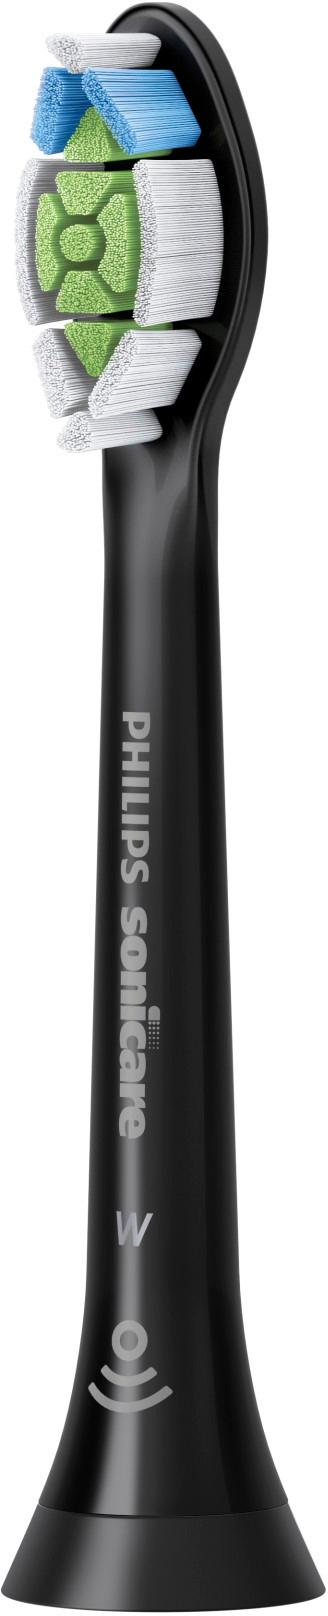 Left View: Philips Norelco - Series 7000 Bodygroom - Silver